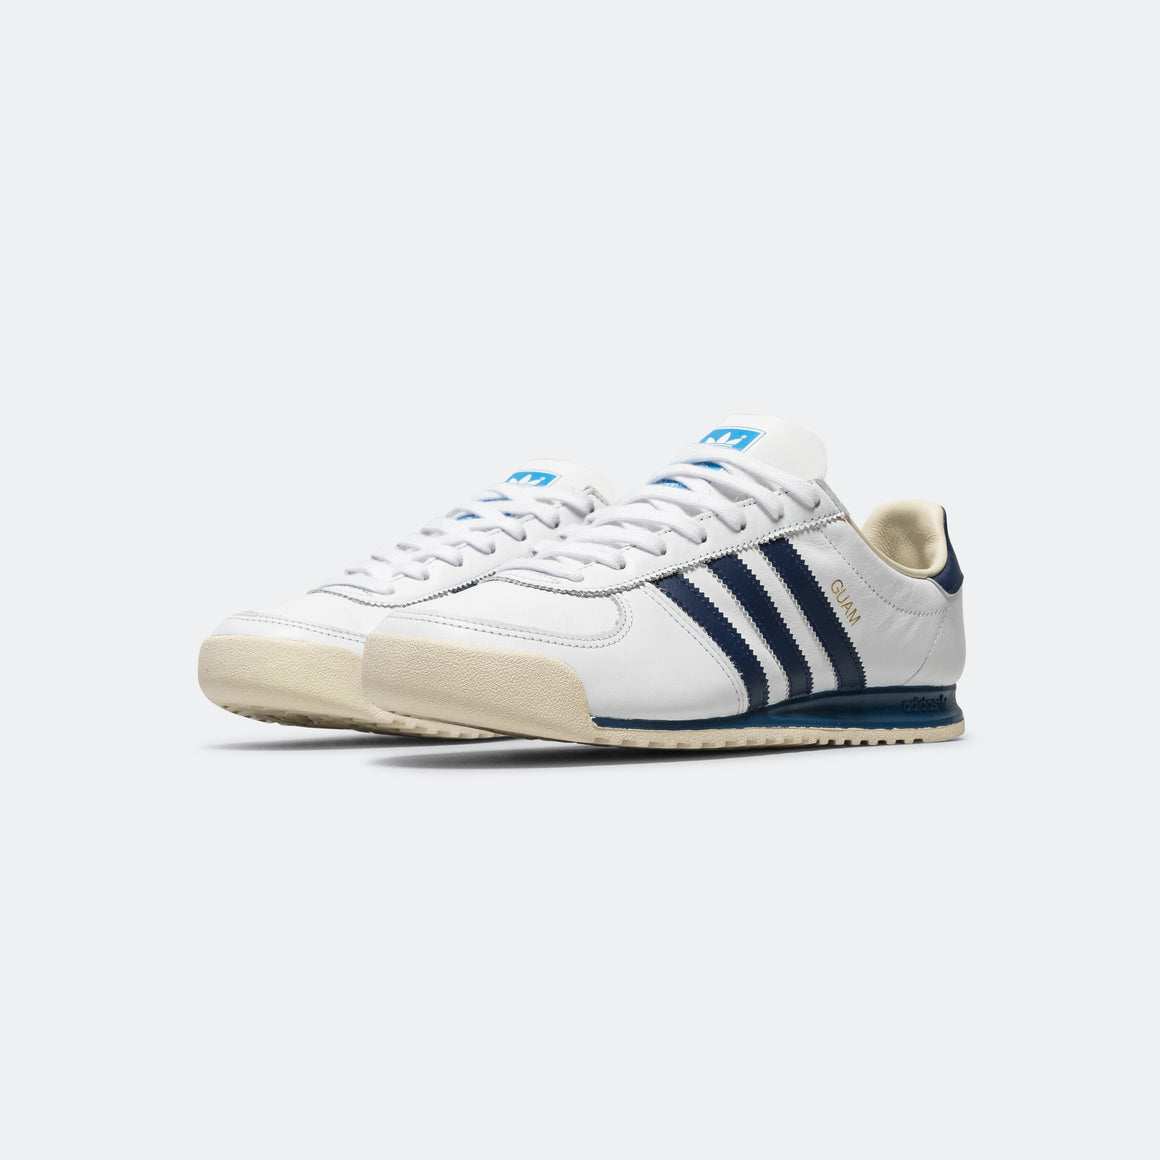 adidas - Guam - Footwear White/Dark Blue-Core White - UP THERE